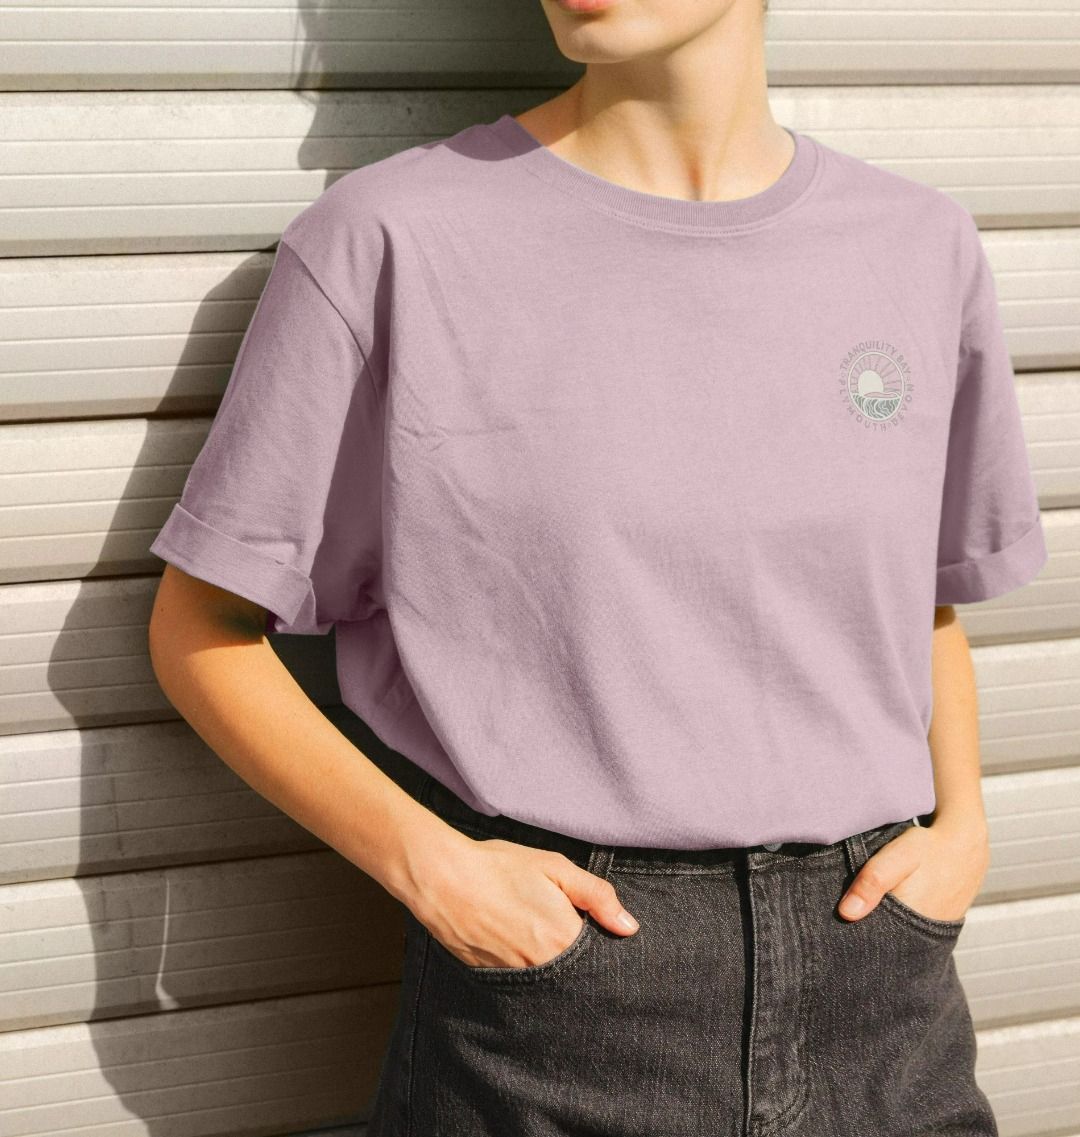 Special Edition Women's Tranquility Bay Tee